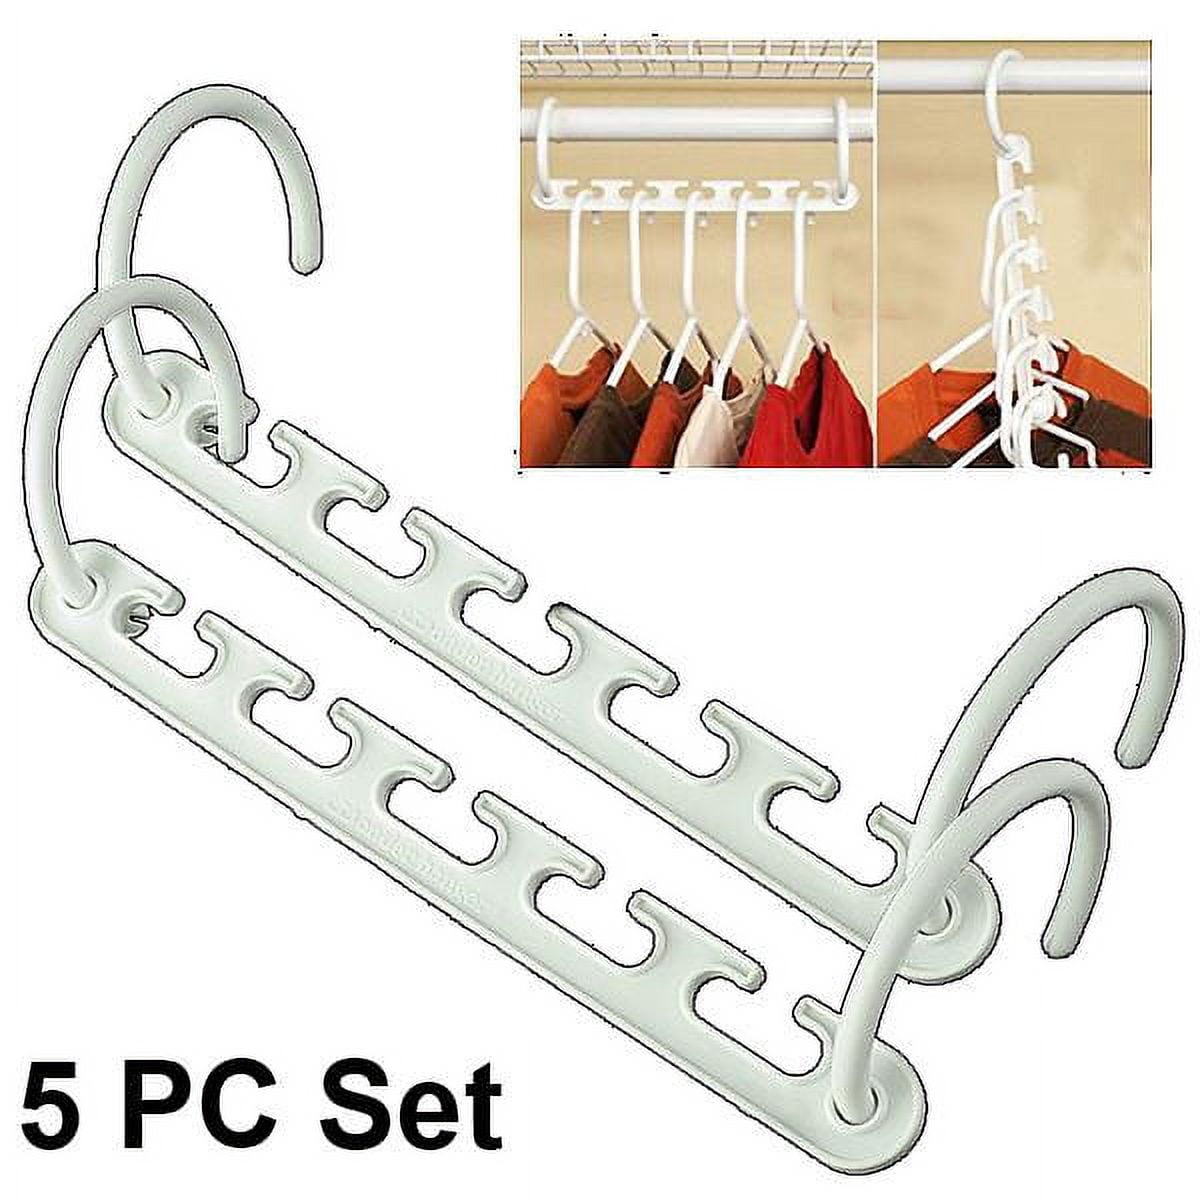 DesignStyles Clear Acrylic Clothes Hangers - 10 Pack Stylish and Heavy Duty Closet Organizer with Silver Chrome Plated Steel